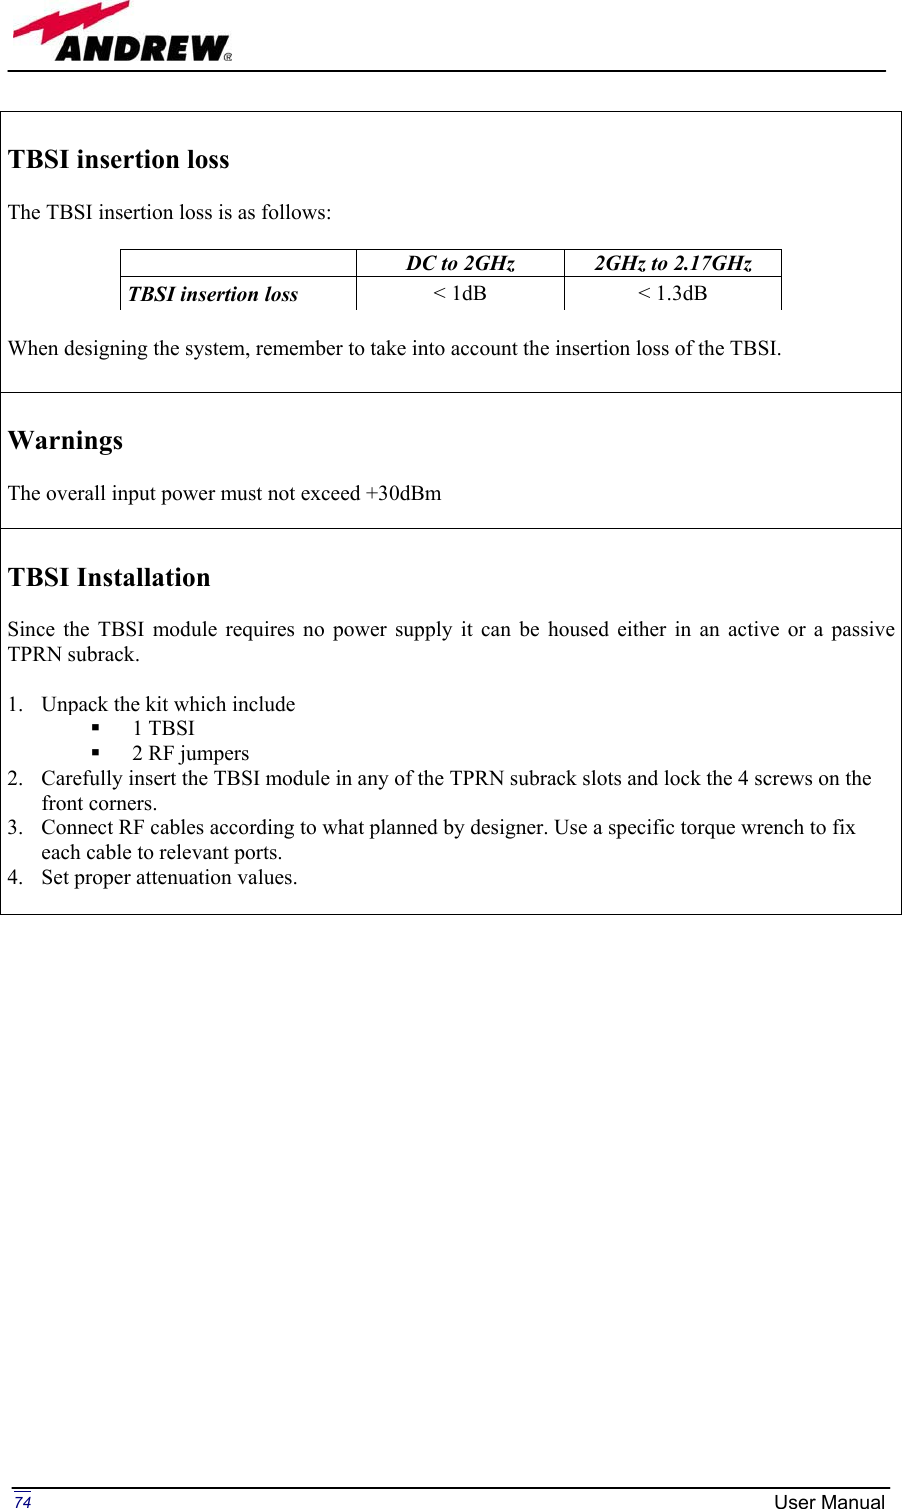 Page 74 of Andrew Wireless Innovations Group BCP-TFAM23 Model TFAM23 Downlink Booster User Manual MN024 04 rev3